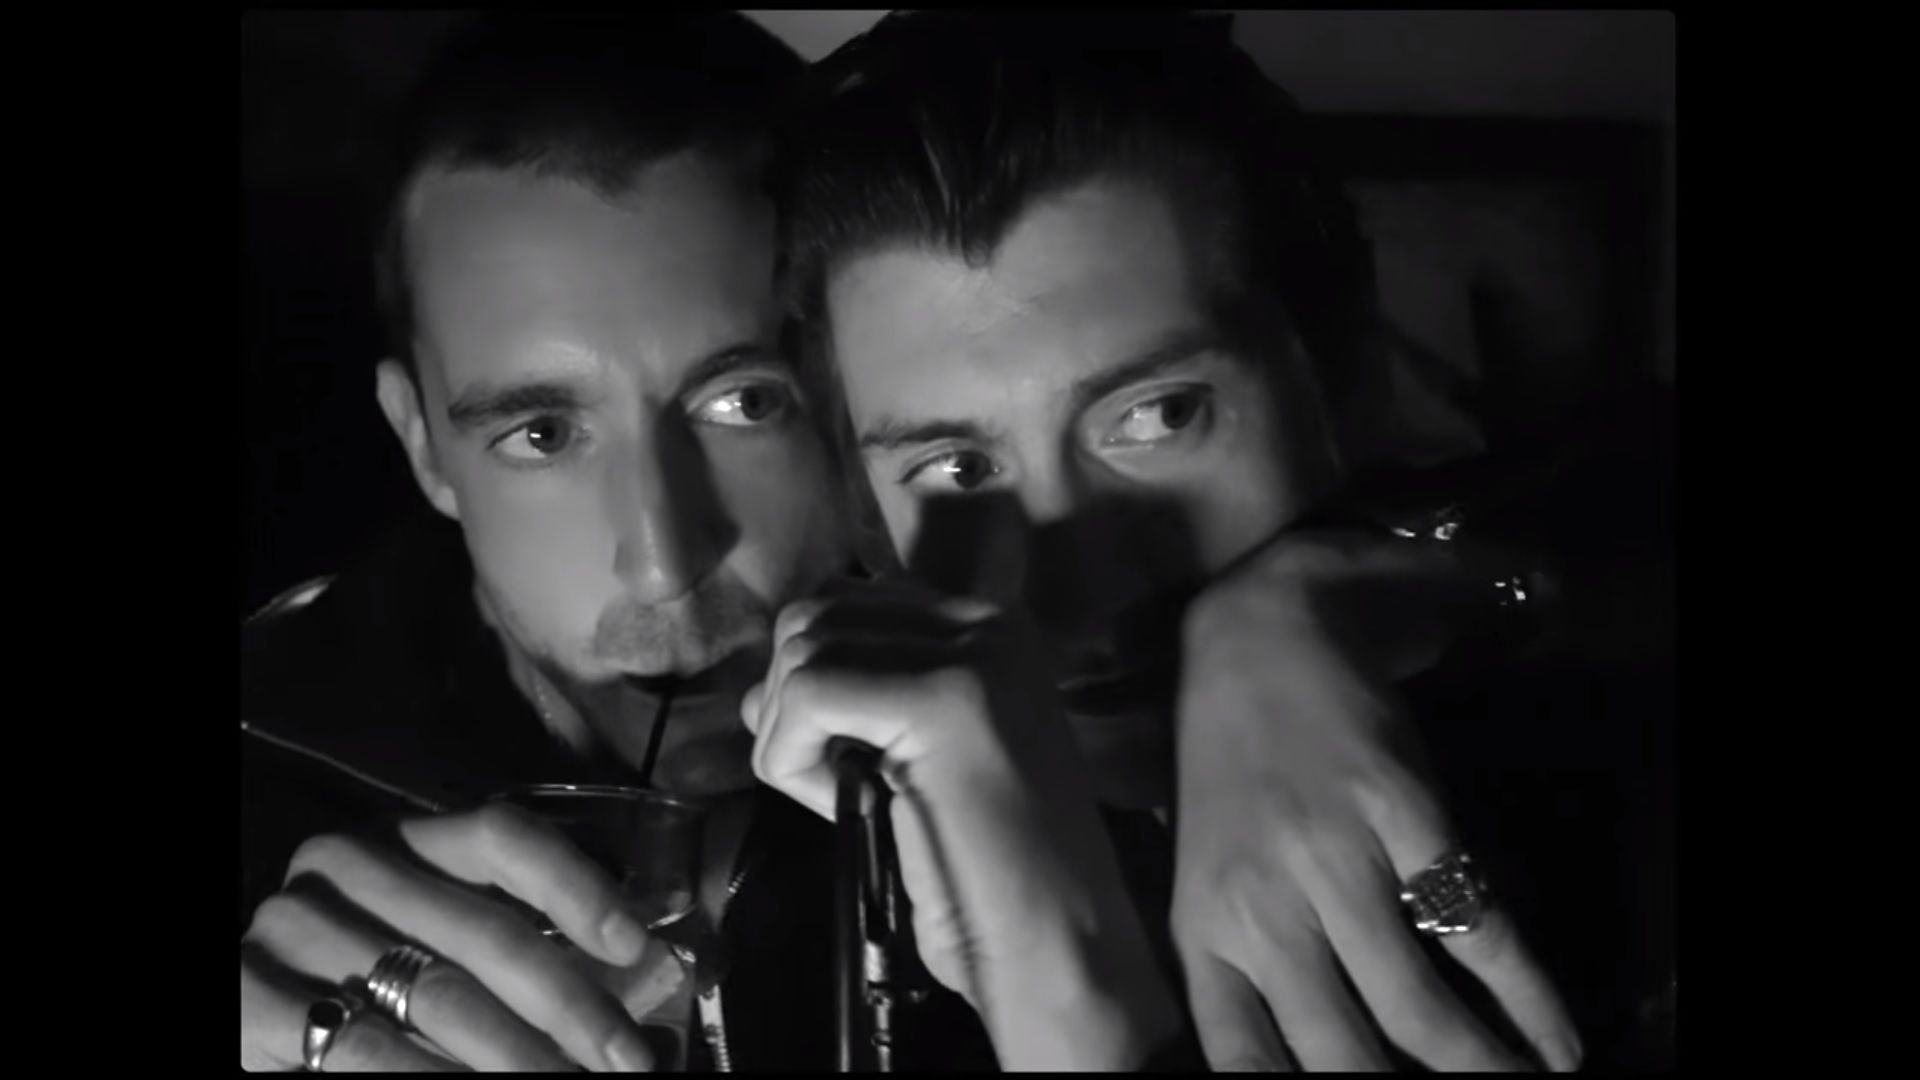 VIDEO: A Teaser of The Last Shadow Puppets' New Album